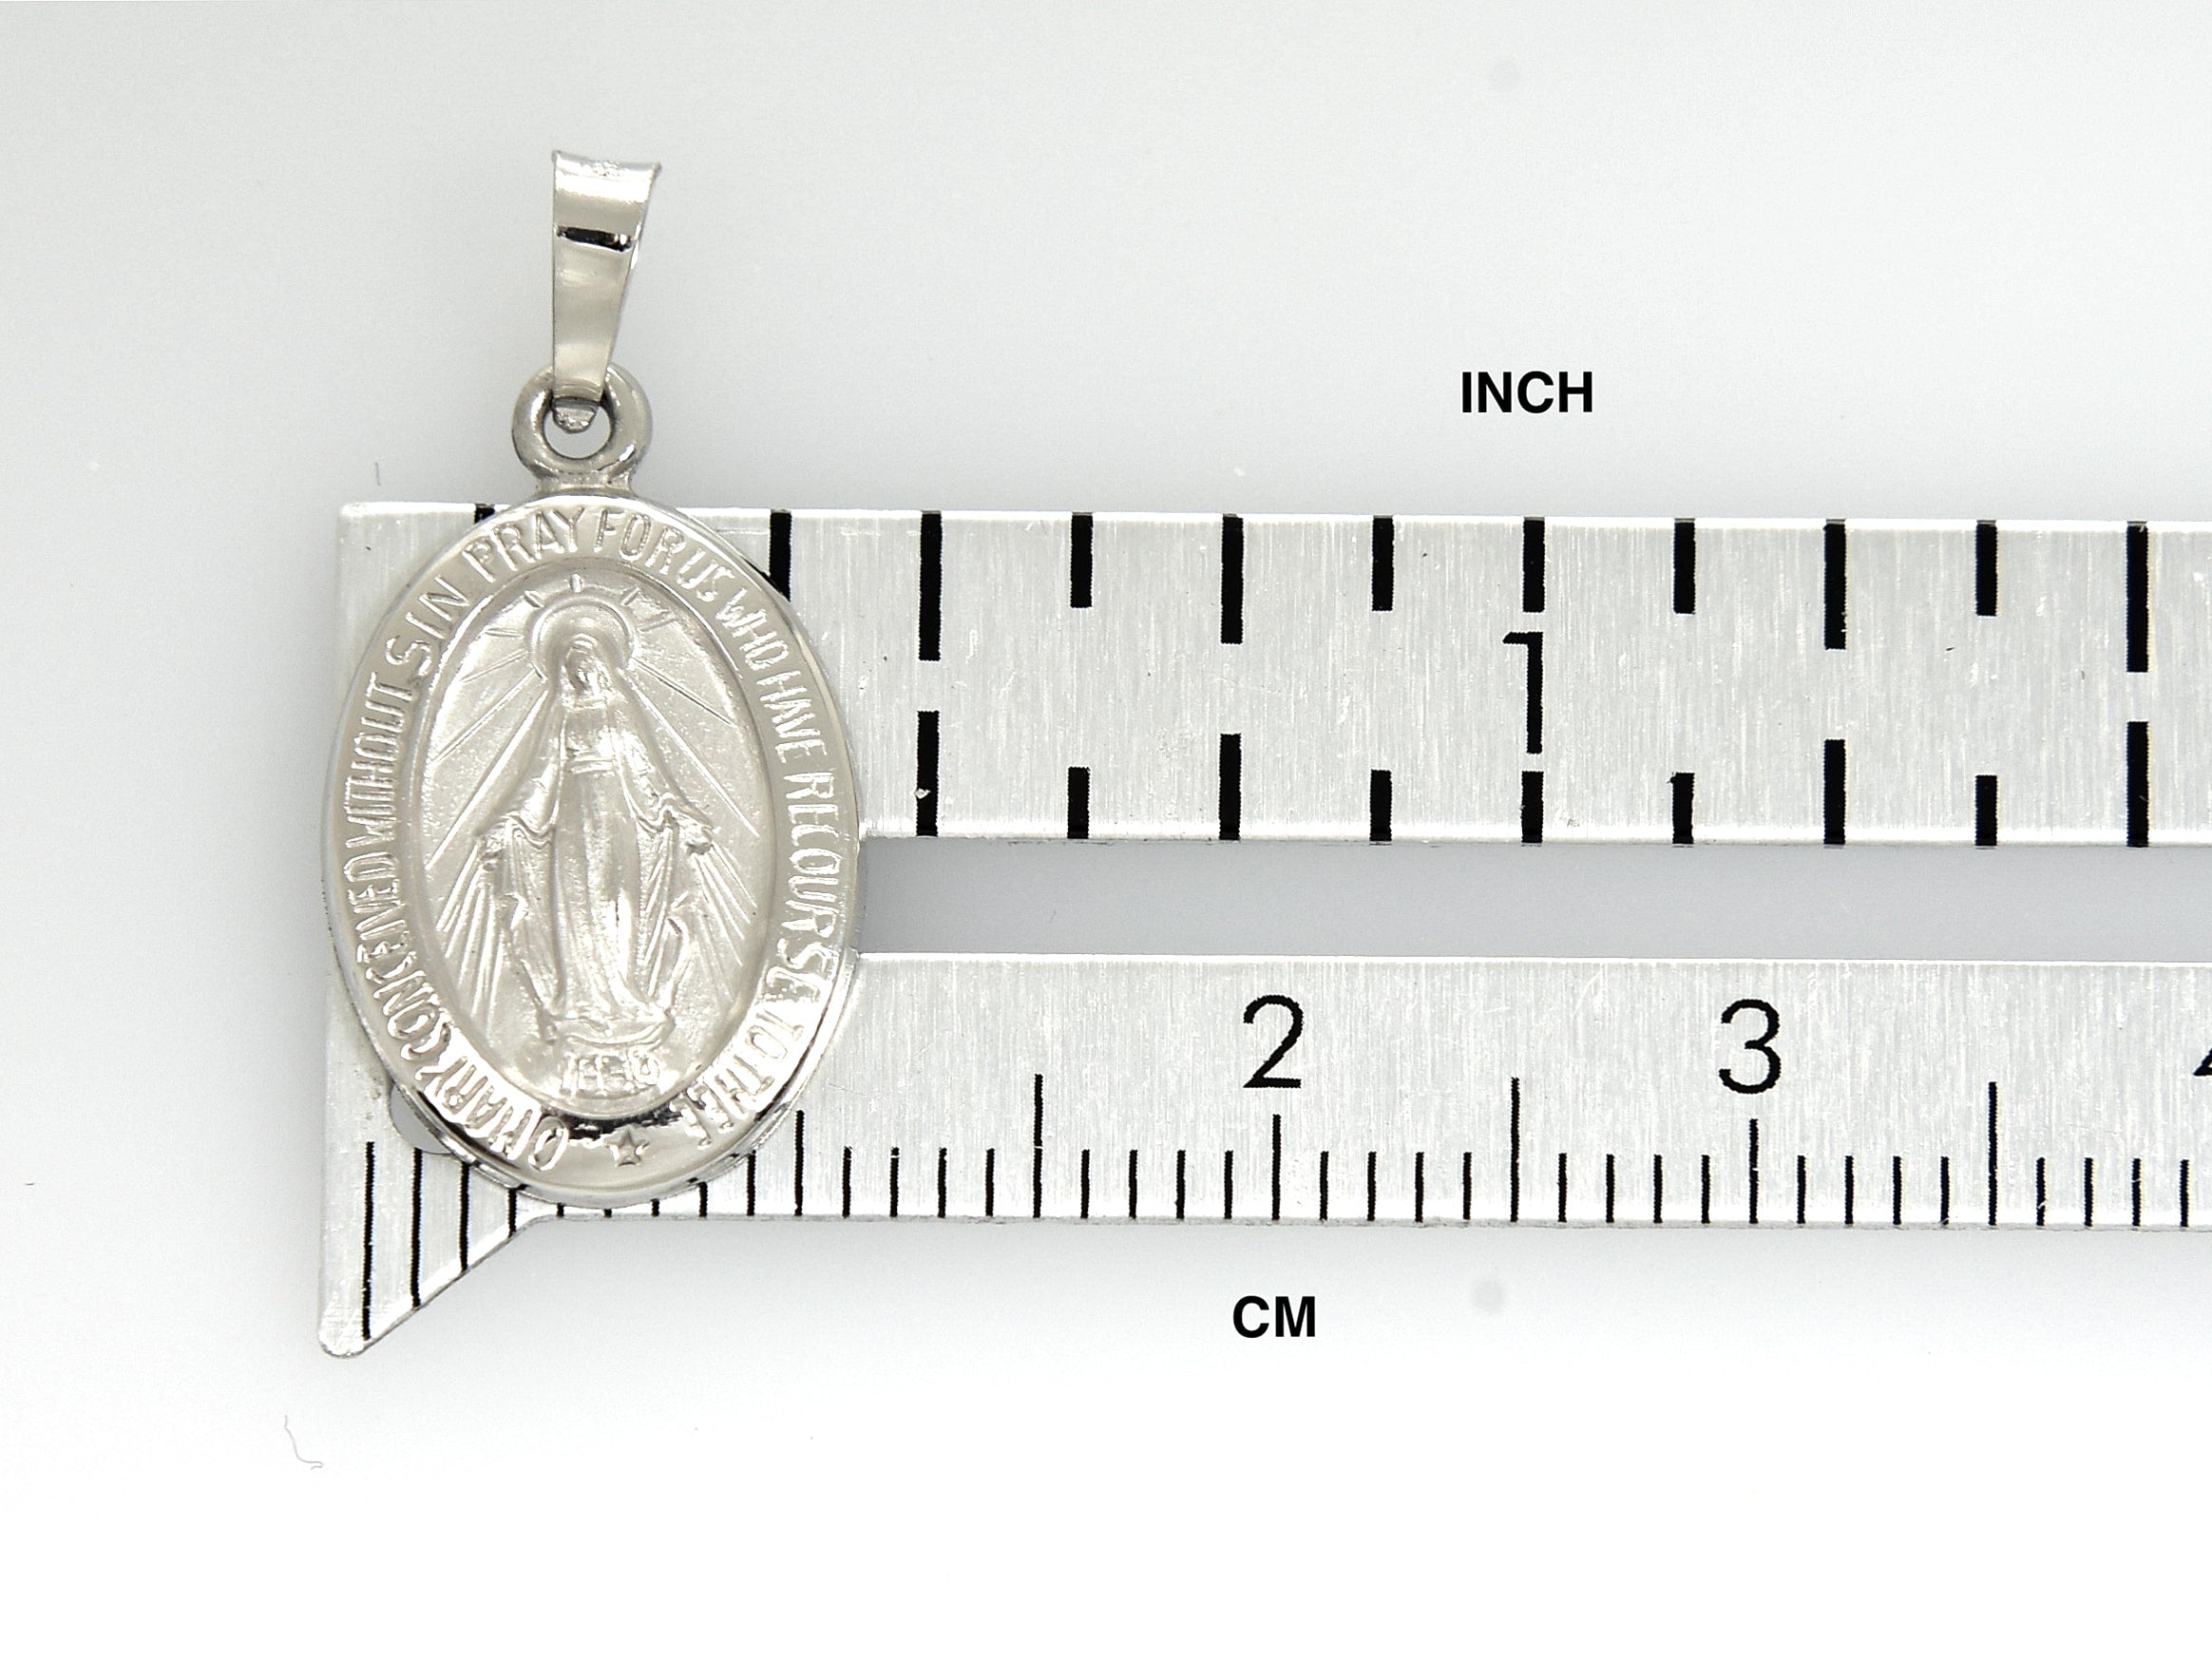 14k White Gold Blessed Virgin Mary Miraculous Medal Oval Small Hollow Pendant Charm